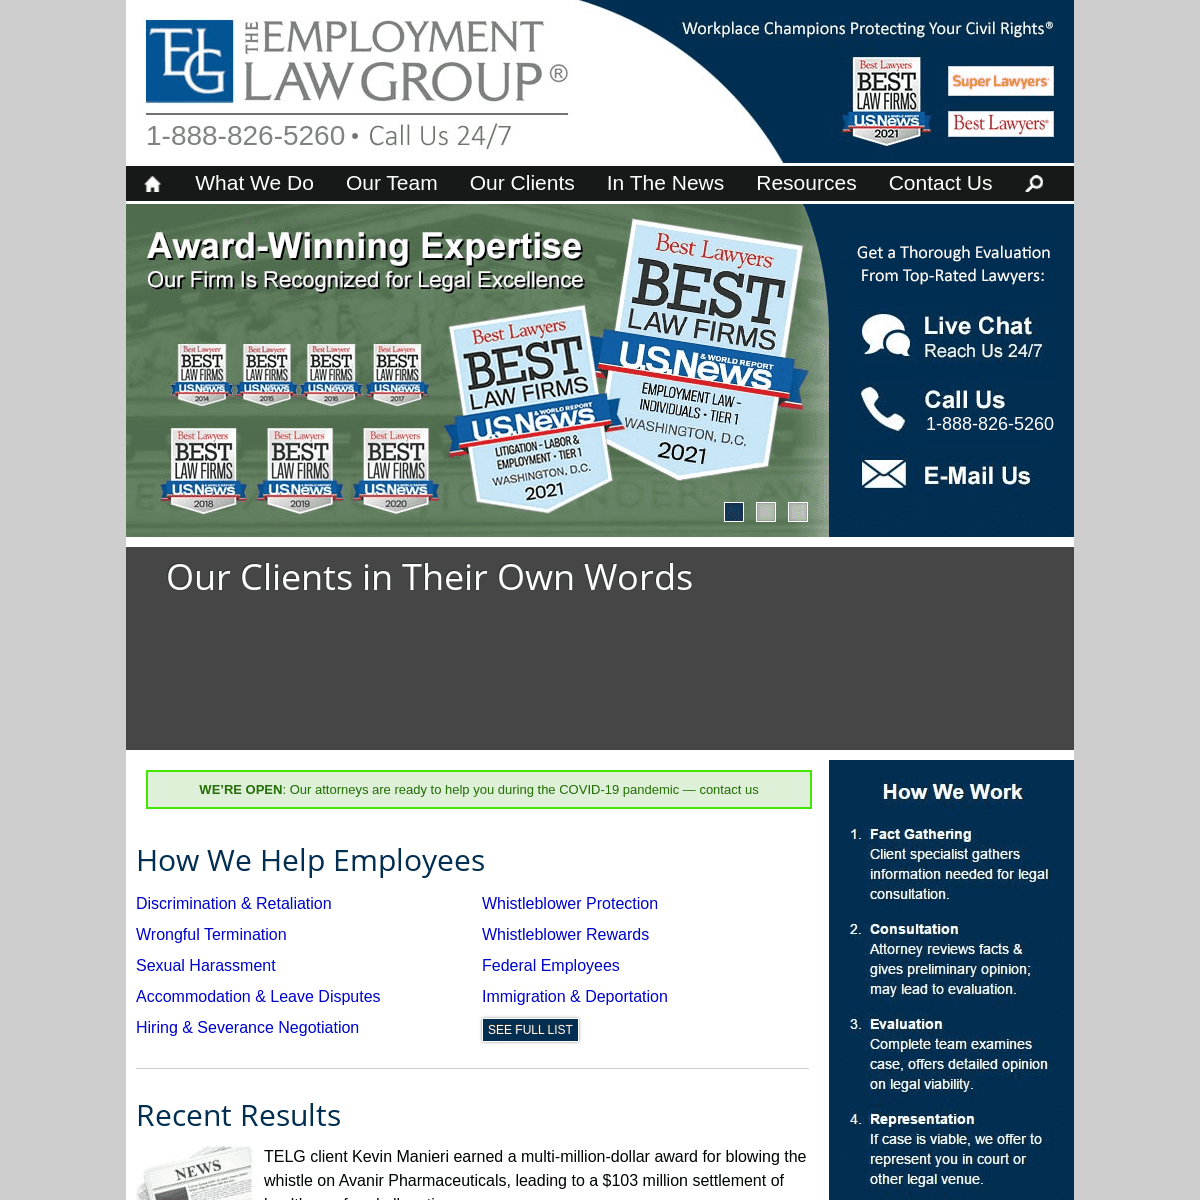 A complete backup of https://employmentlawgroup.com